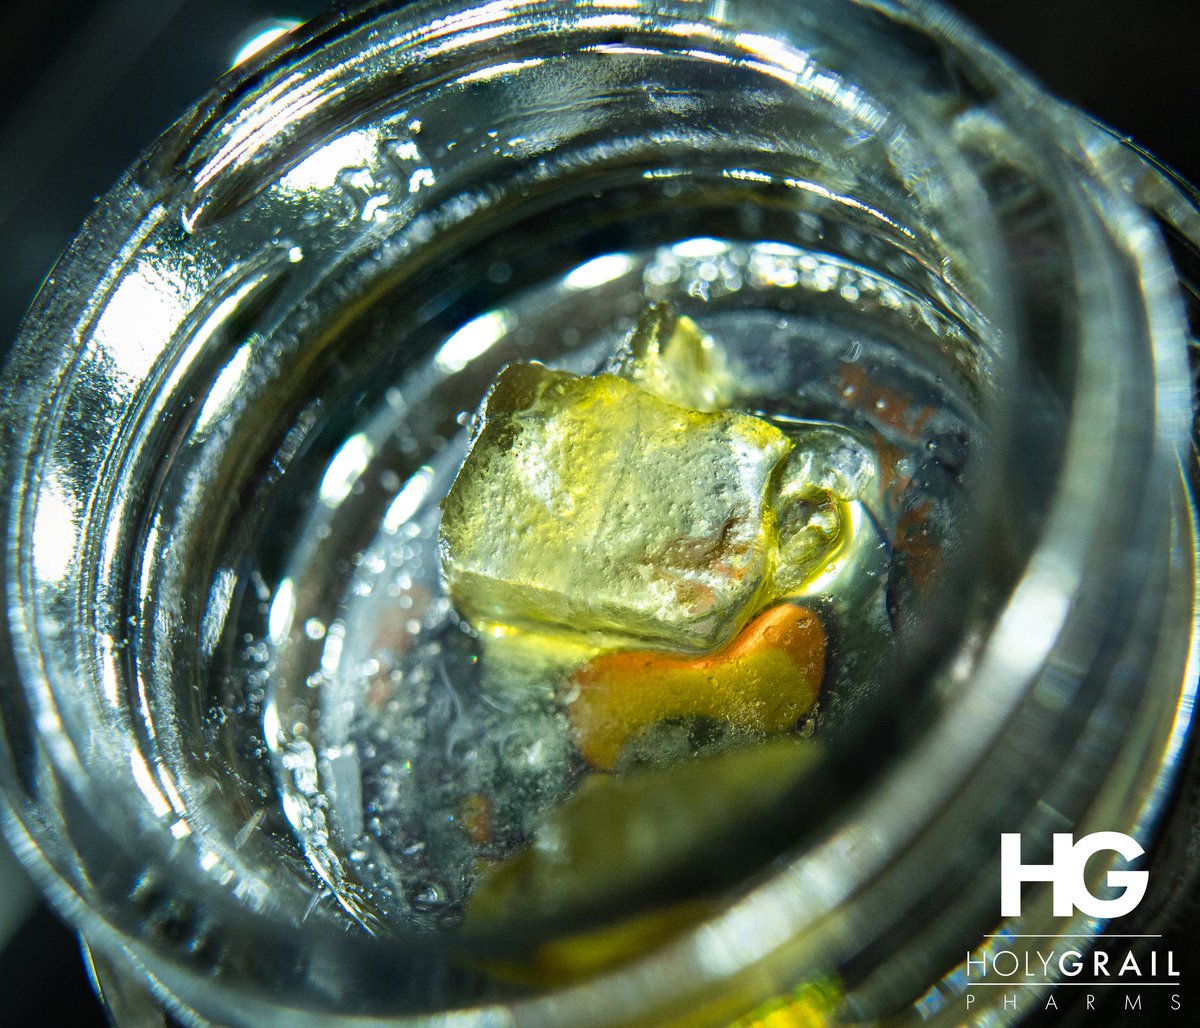 Altered Alchemy diamonds are now at Holy Grail Pharms!!! This is one of the ultimate dabbing experiences!